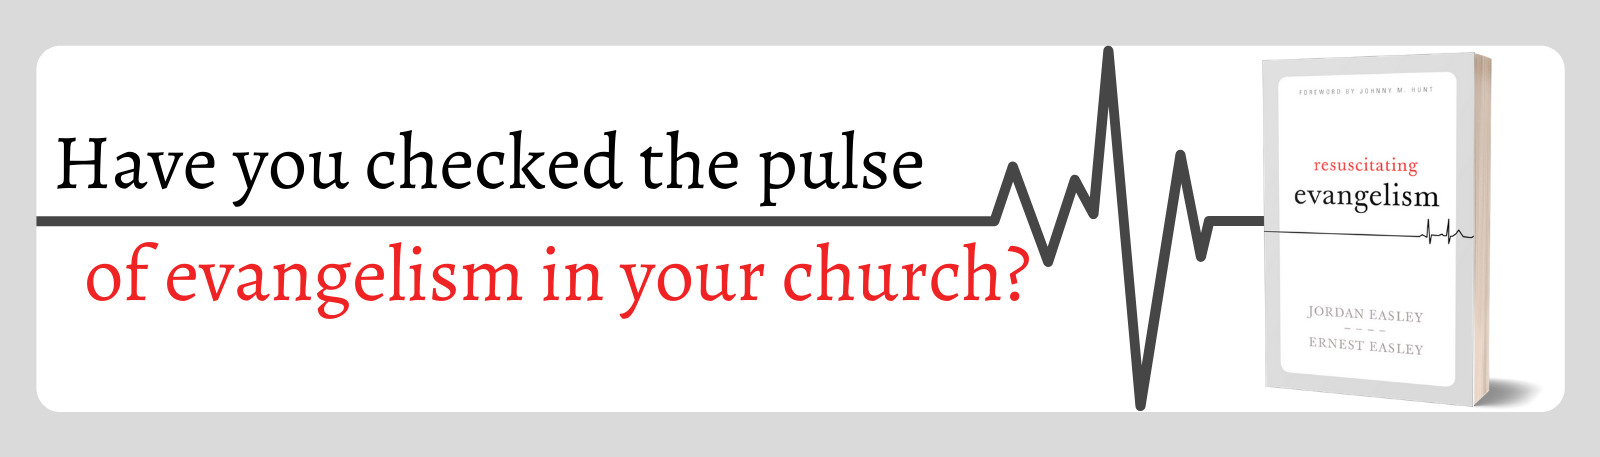 Have you checked the pulse of evangelism in your church?